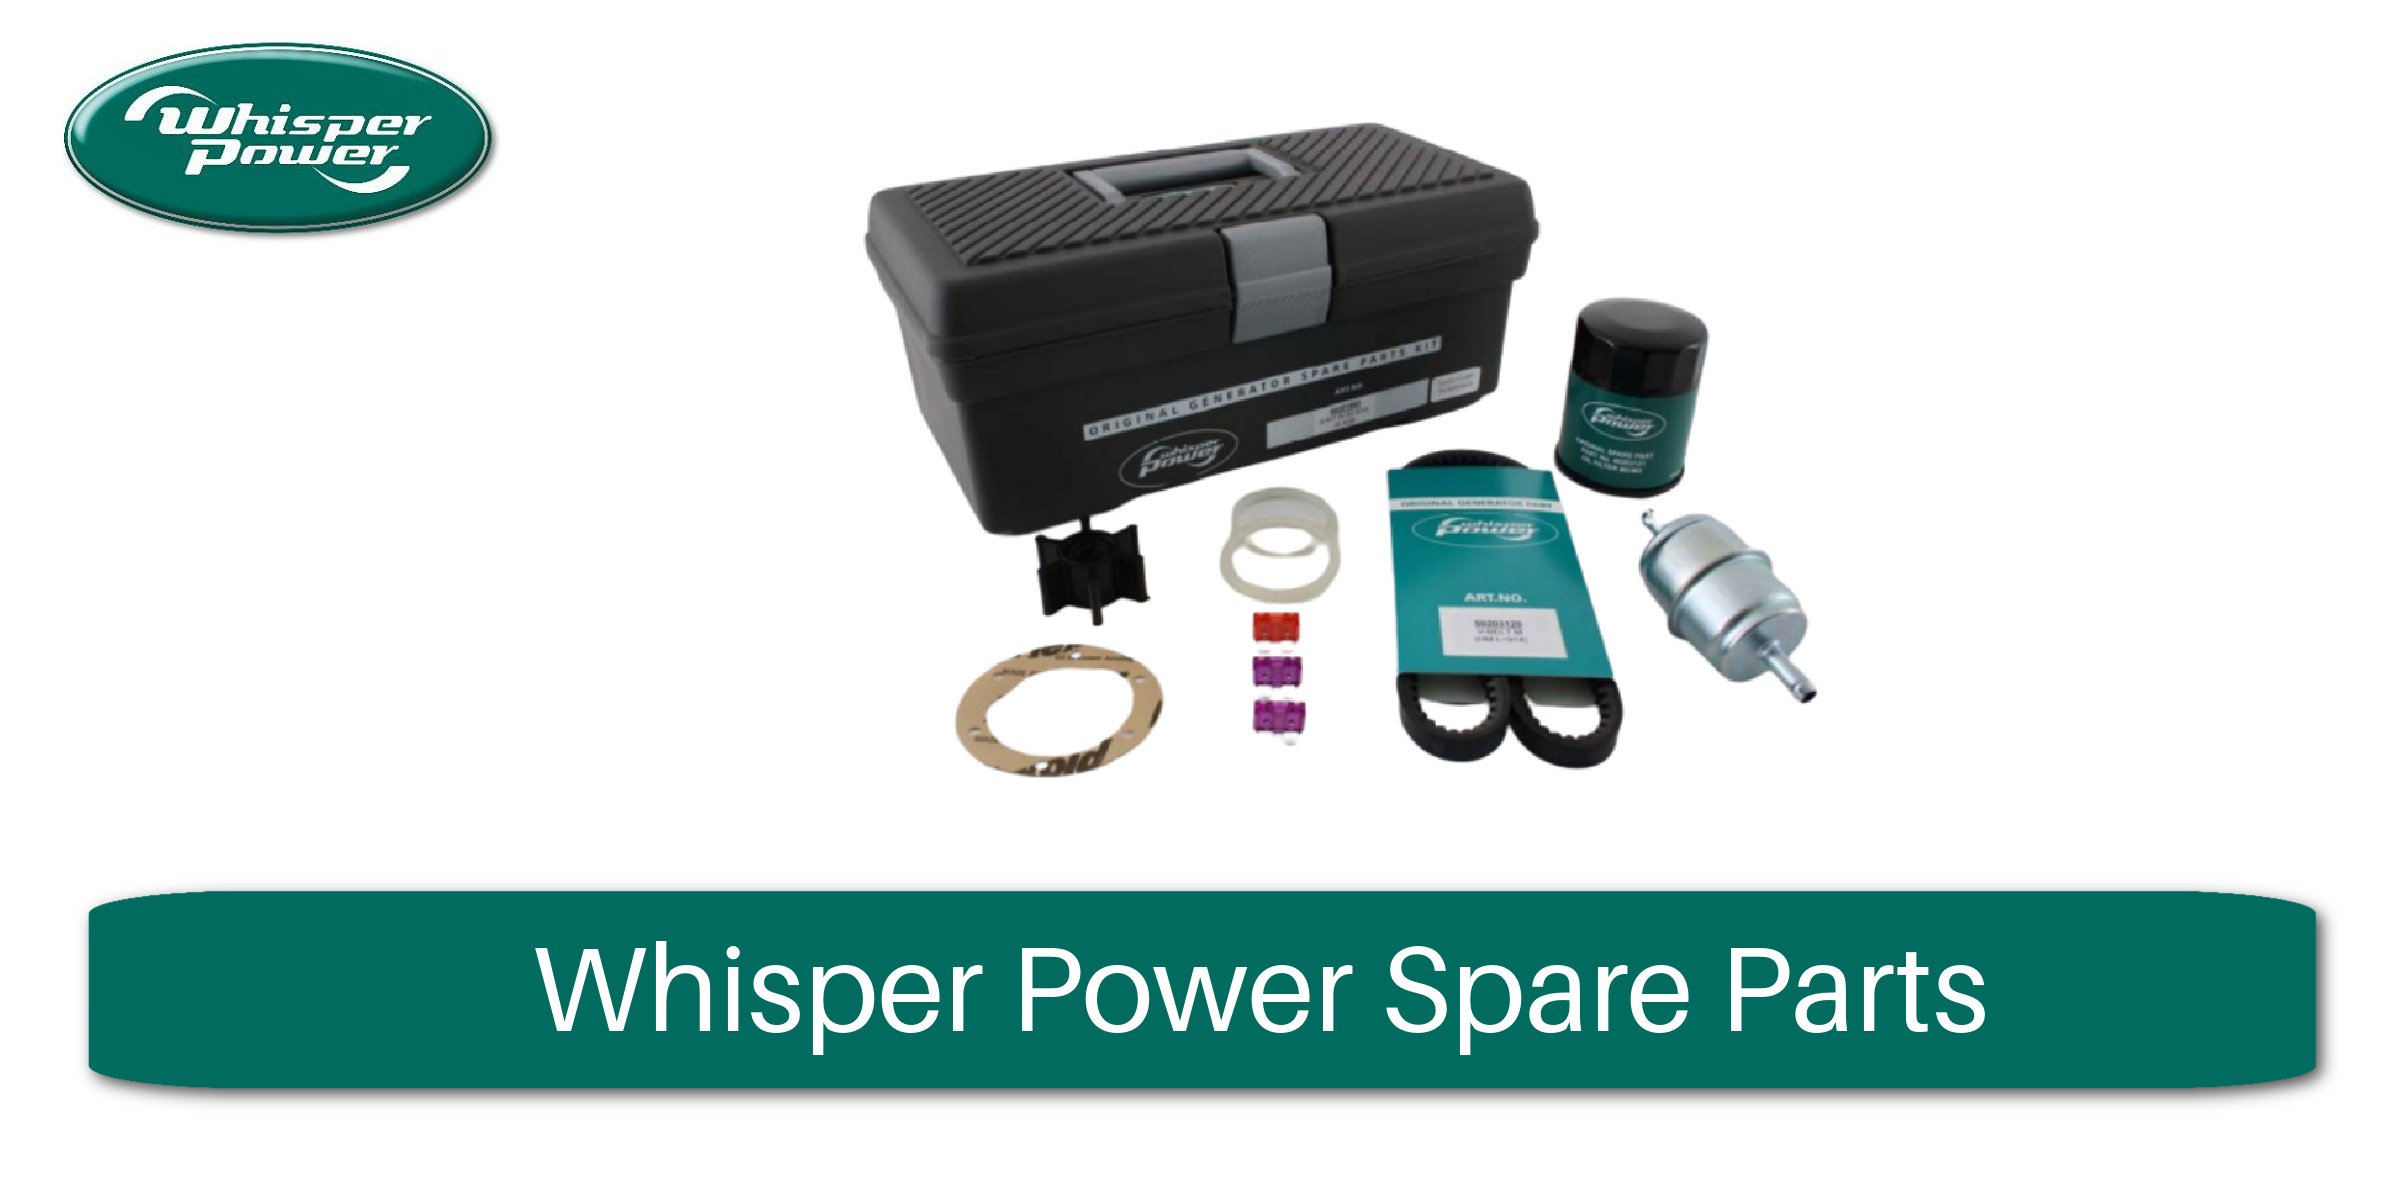 Whisper Power Spare Parts